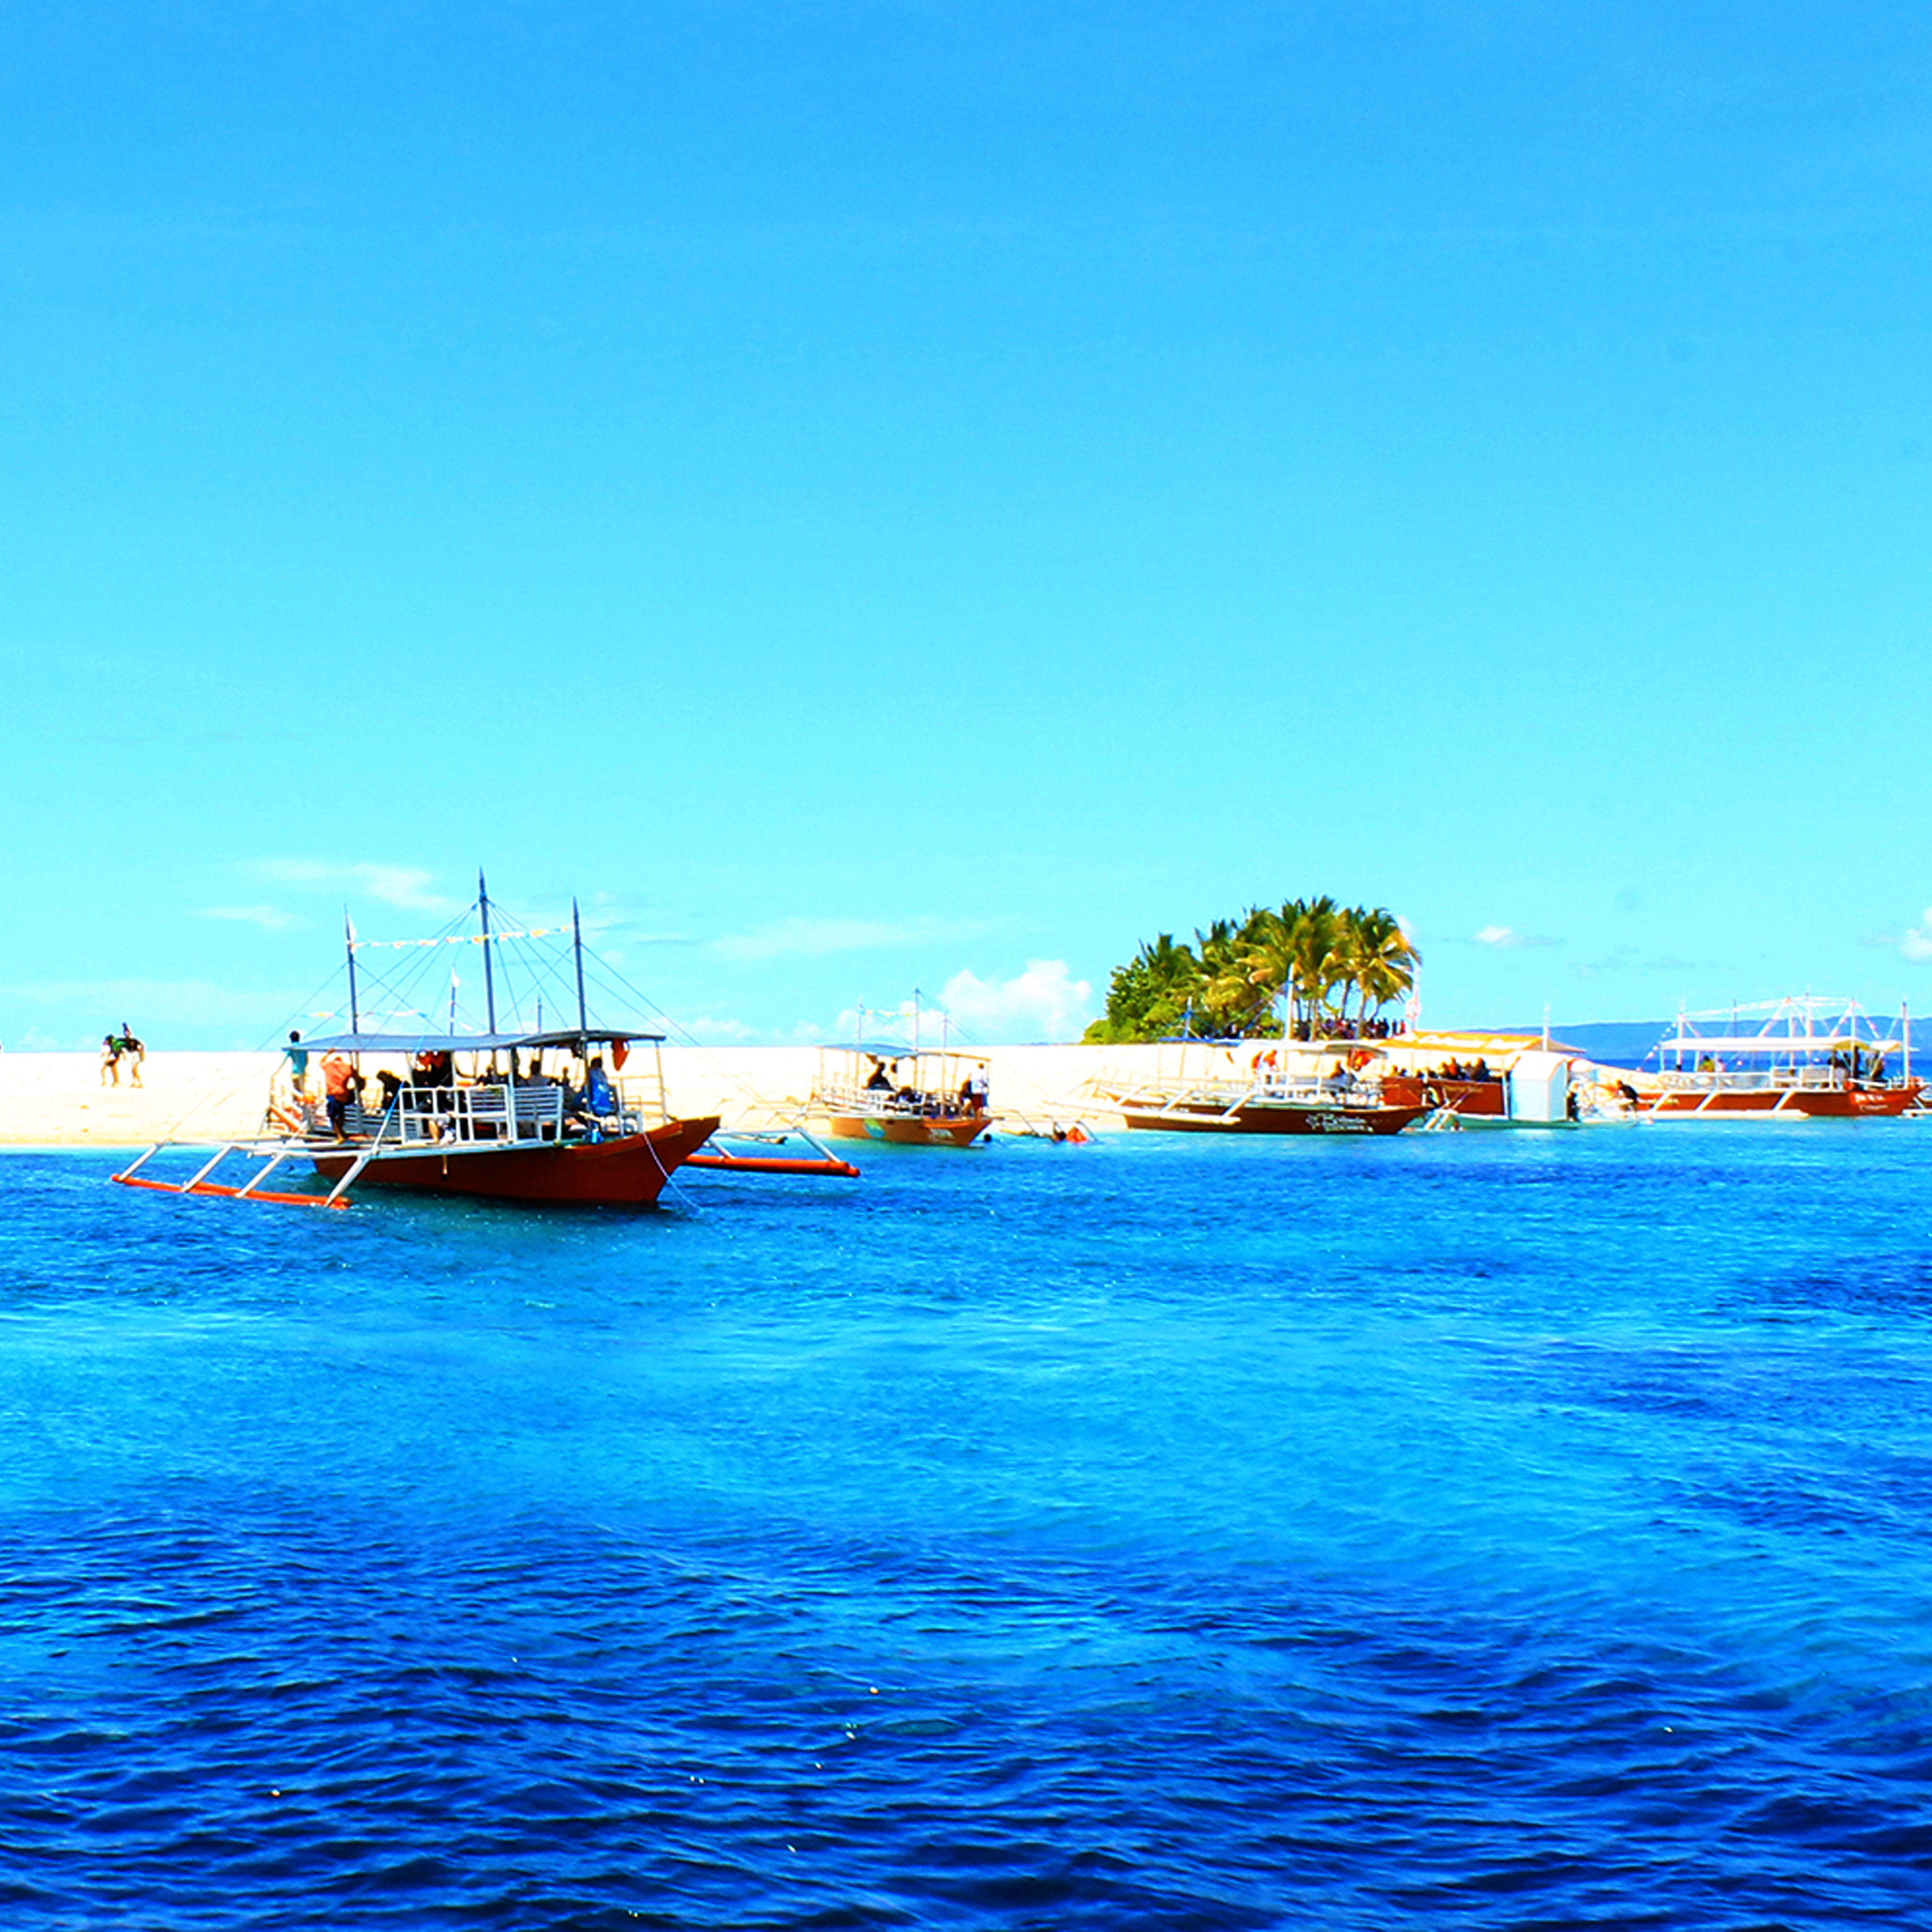 <b class="font-bara"><i class="bi bi-geo-fill h4"></i> HAGONOY ISLET</b> <br/>Coined as the “Lovers Islet”, it is a perfect romantic getaway for couples and a romantic venue for their honeymoon and pre-nuptial pictorials. It has the widest shoreline best for picnics, beach sports and other recreational activities. The islet is good for skiing and surfing when the waves reach 15 to 20ft rough.